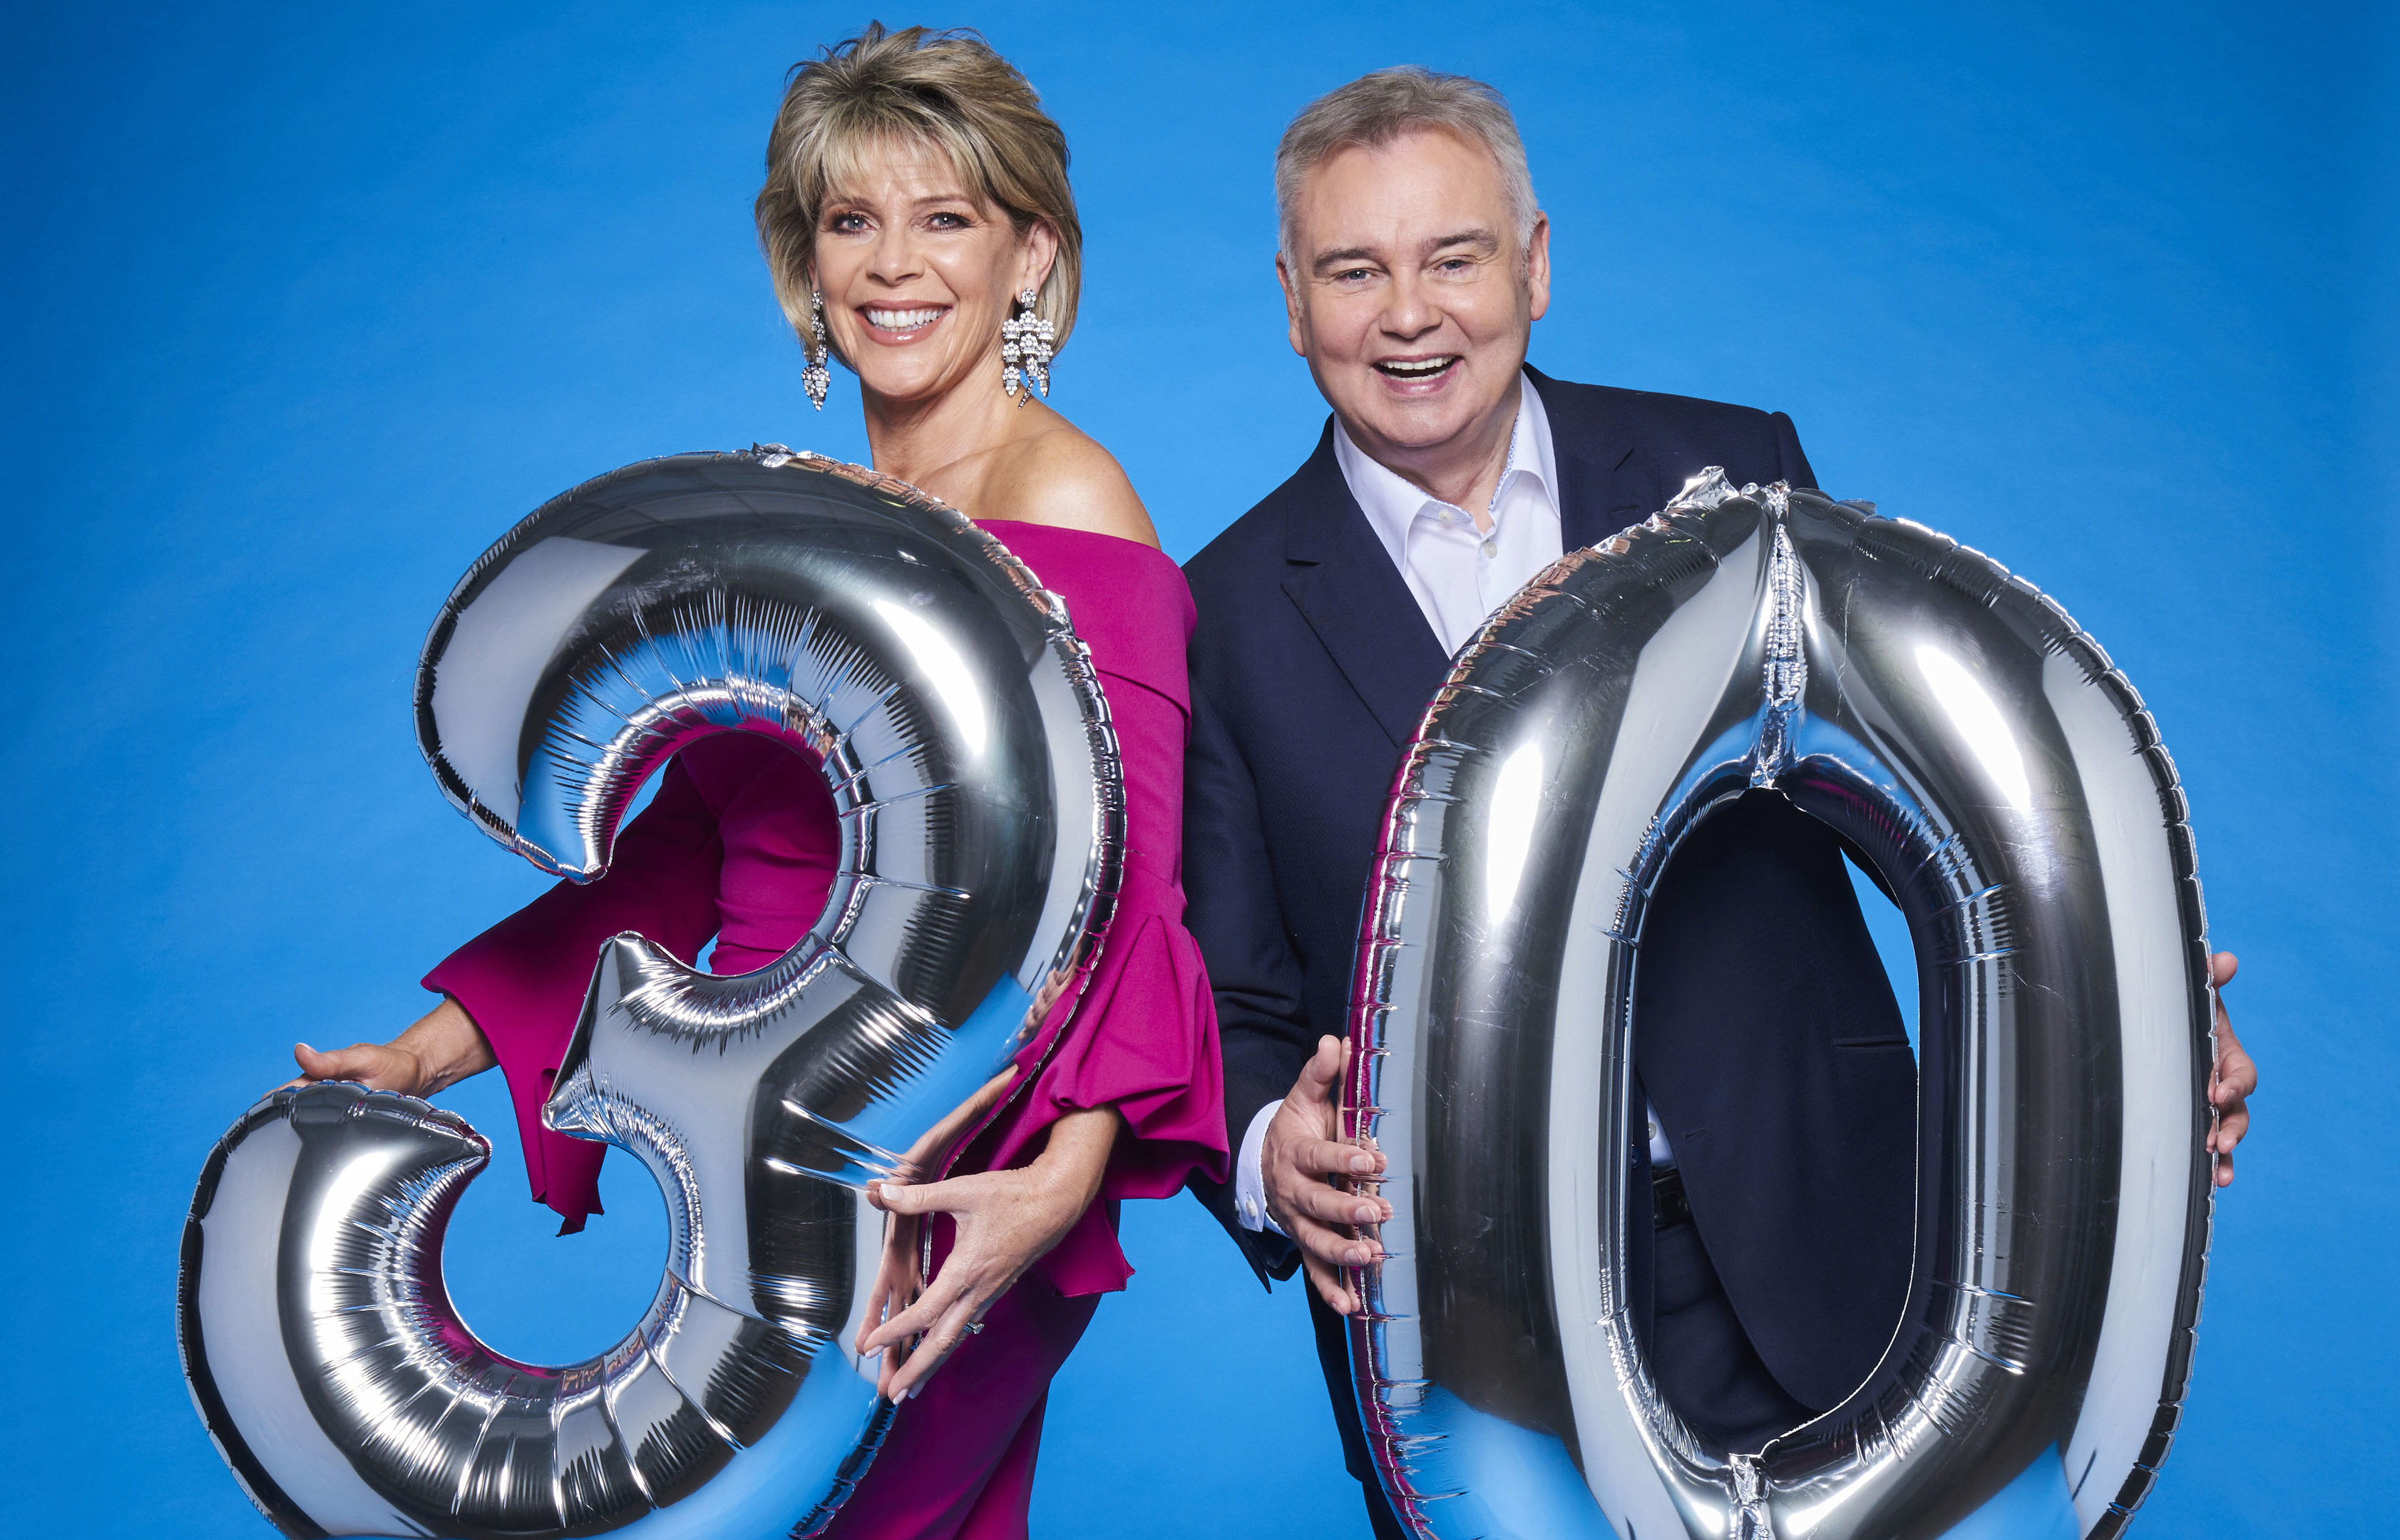 Eamonn Holmes and Ruth Langford celebrate 30 years of This Morning (ITV / Ken McKay)